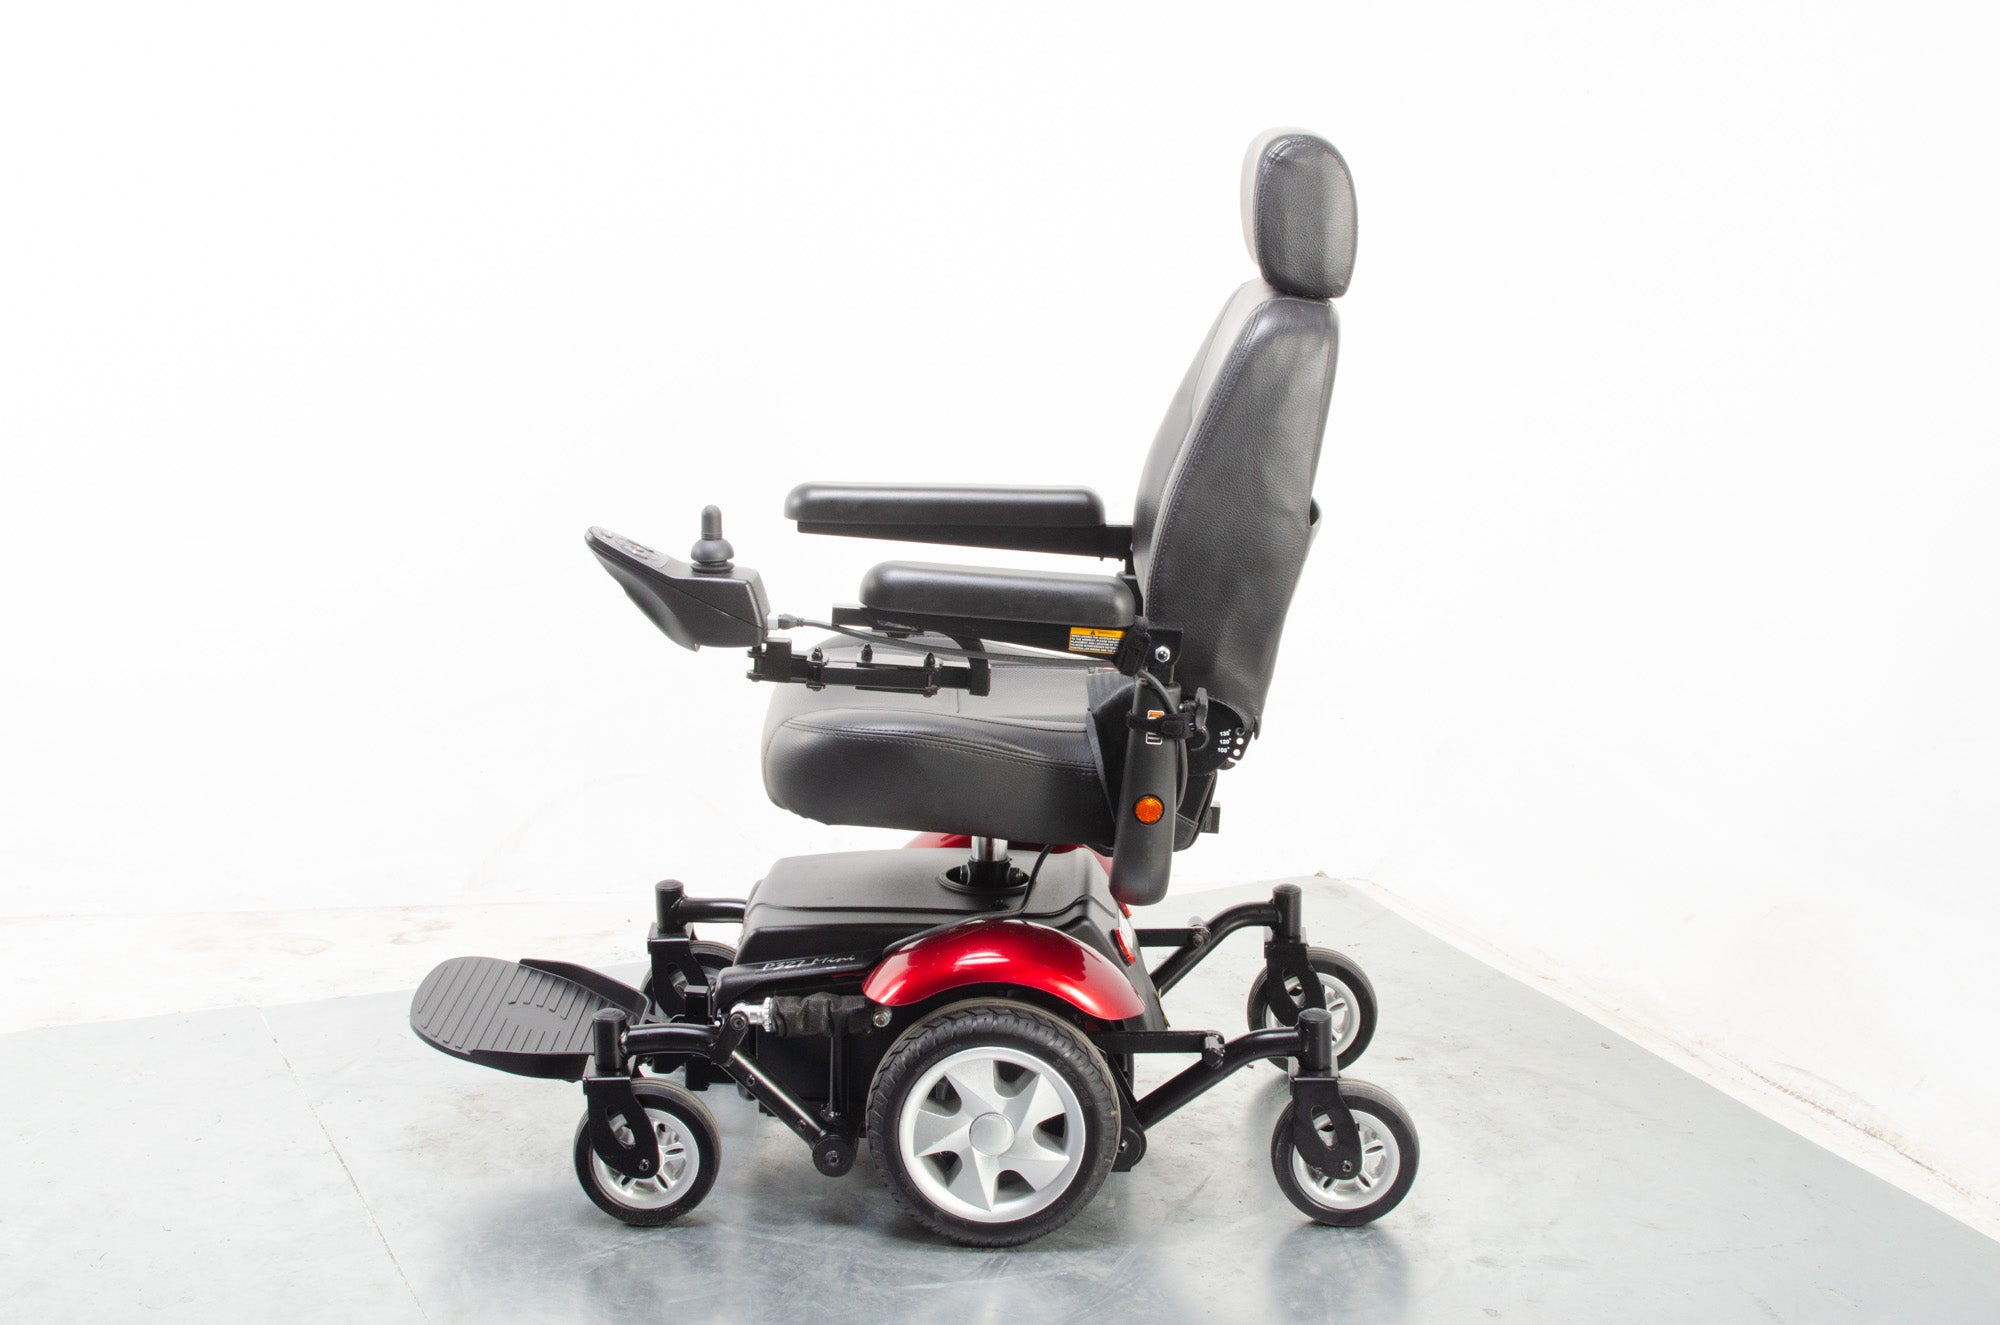 Rascal P327 Mini Electric Mobility Wheelchair Powerchair Indoor Outdoor Red